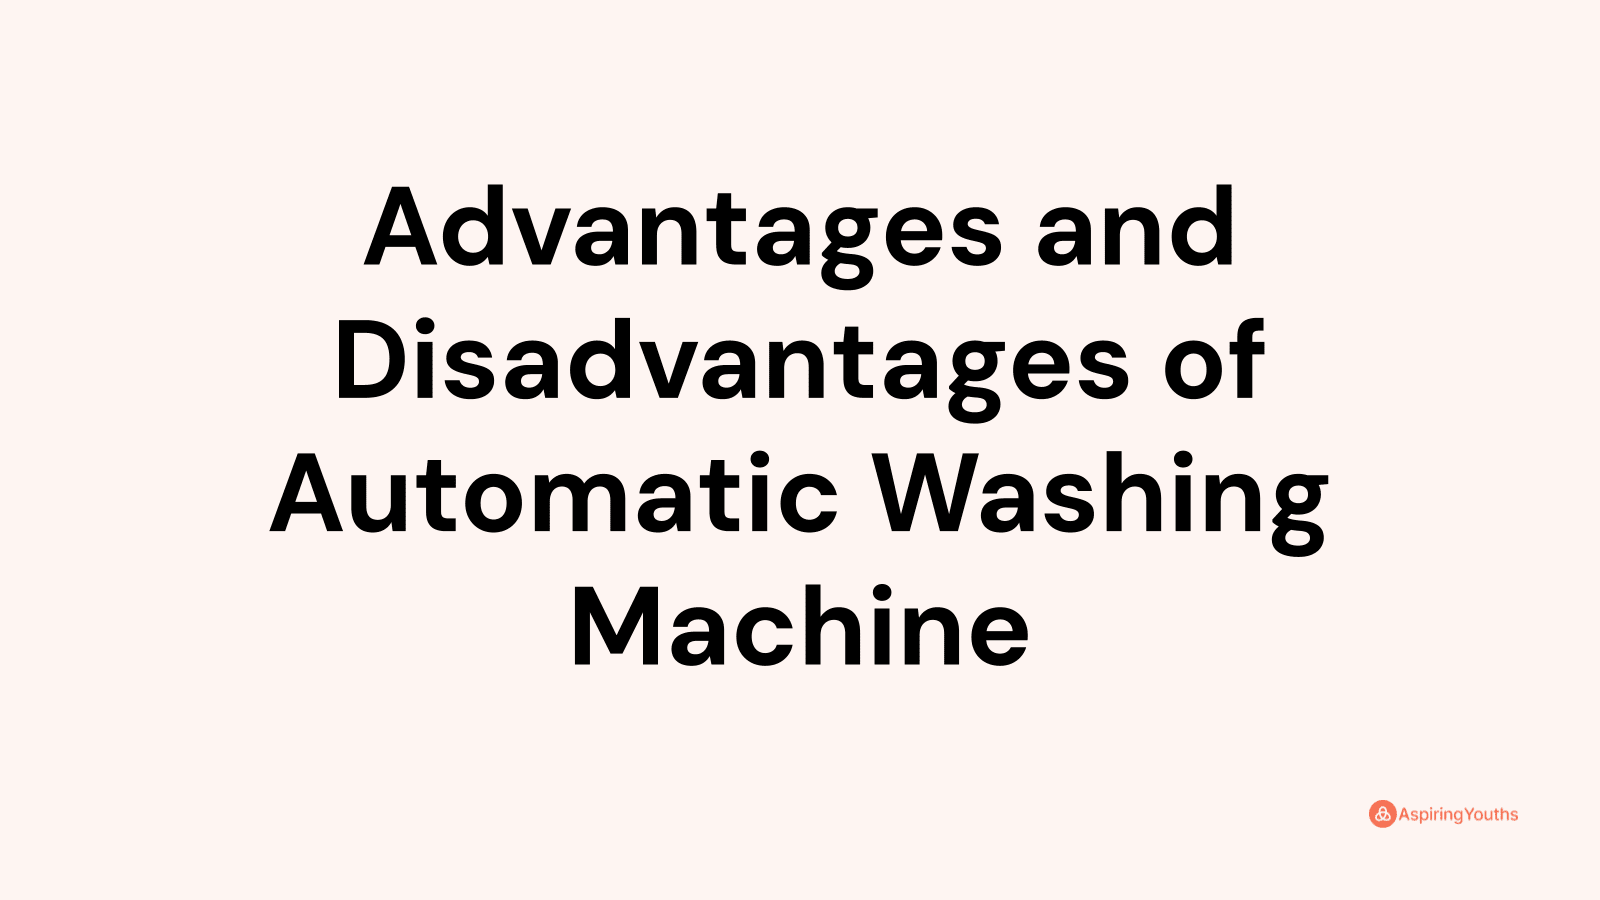 Advantages and disadvantages of Automatic Washing Machine